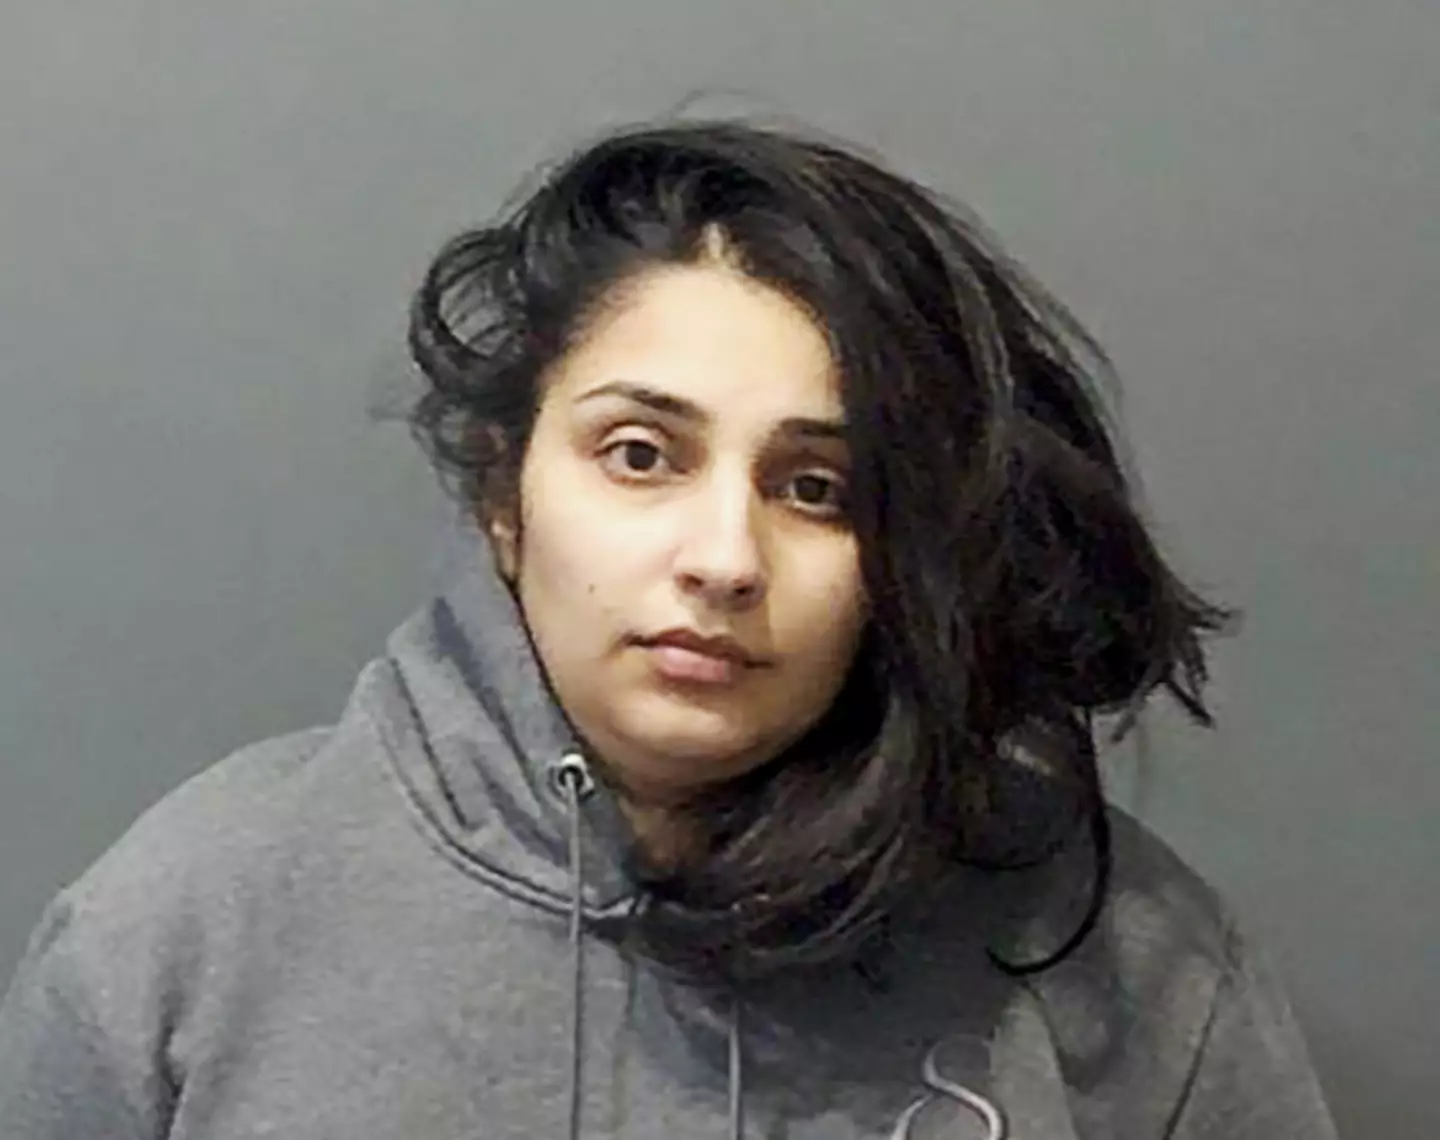 Dhillon was sentenced to 10 years for manslaughter and 10 years for conspiracy to commit robbery.